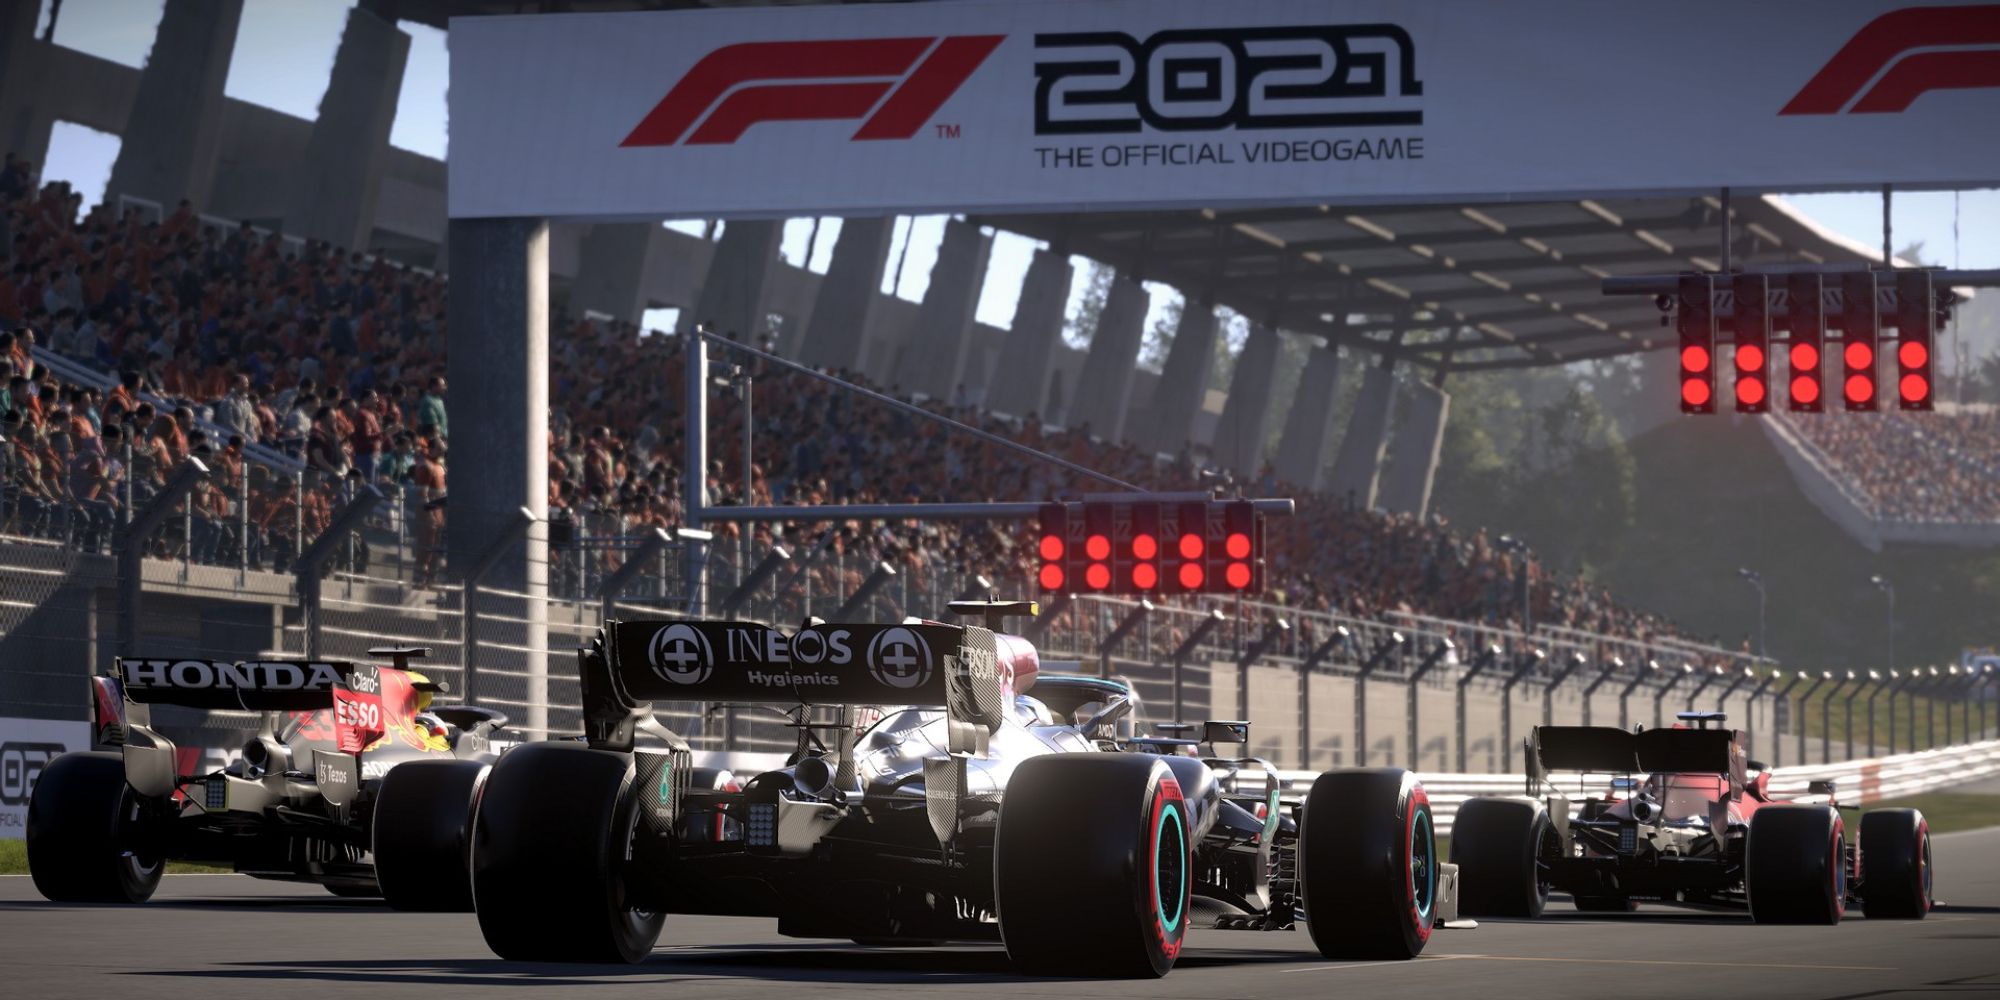 F1 2021 Starting Grid with Mercedes, Red Bull, and Ferrari